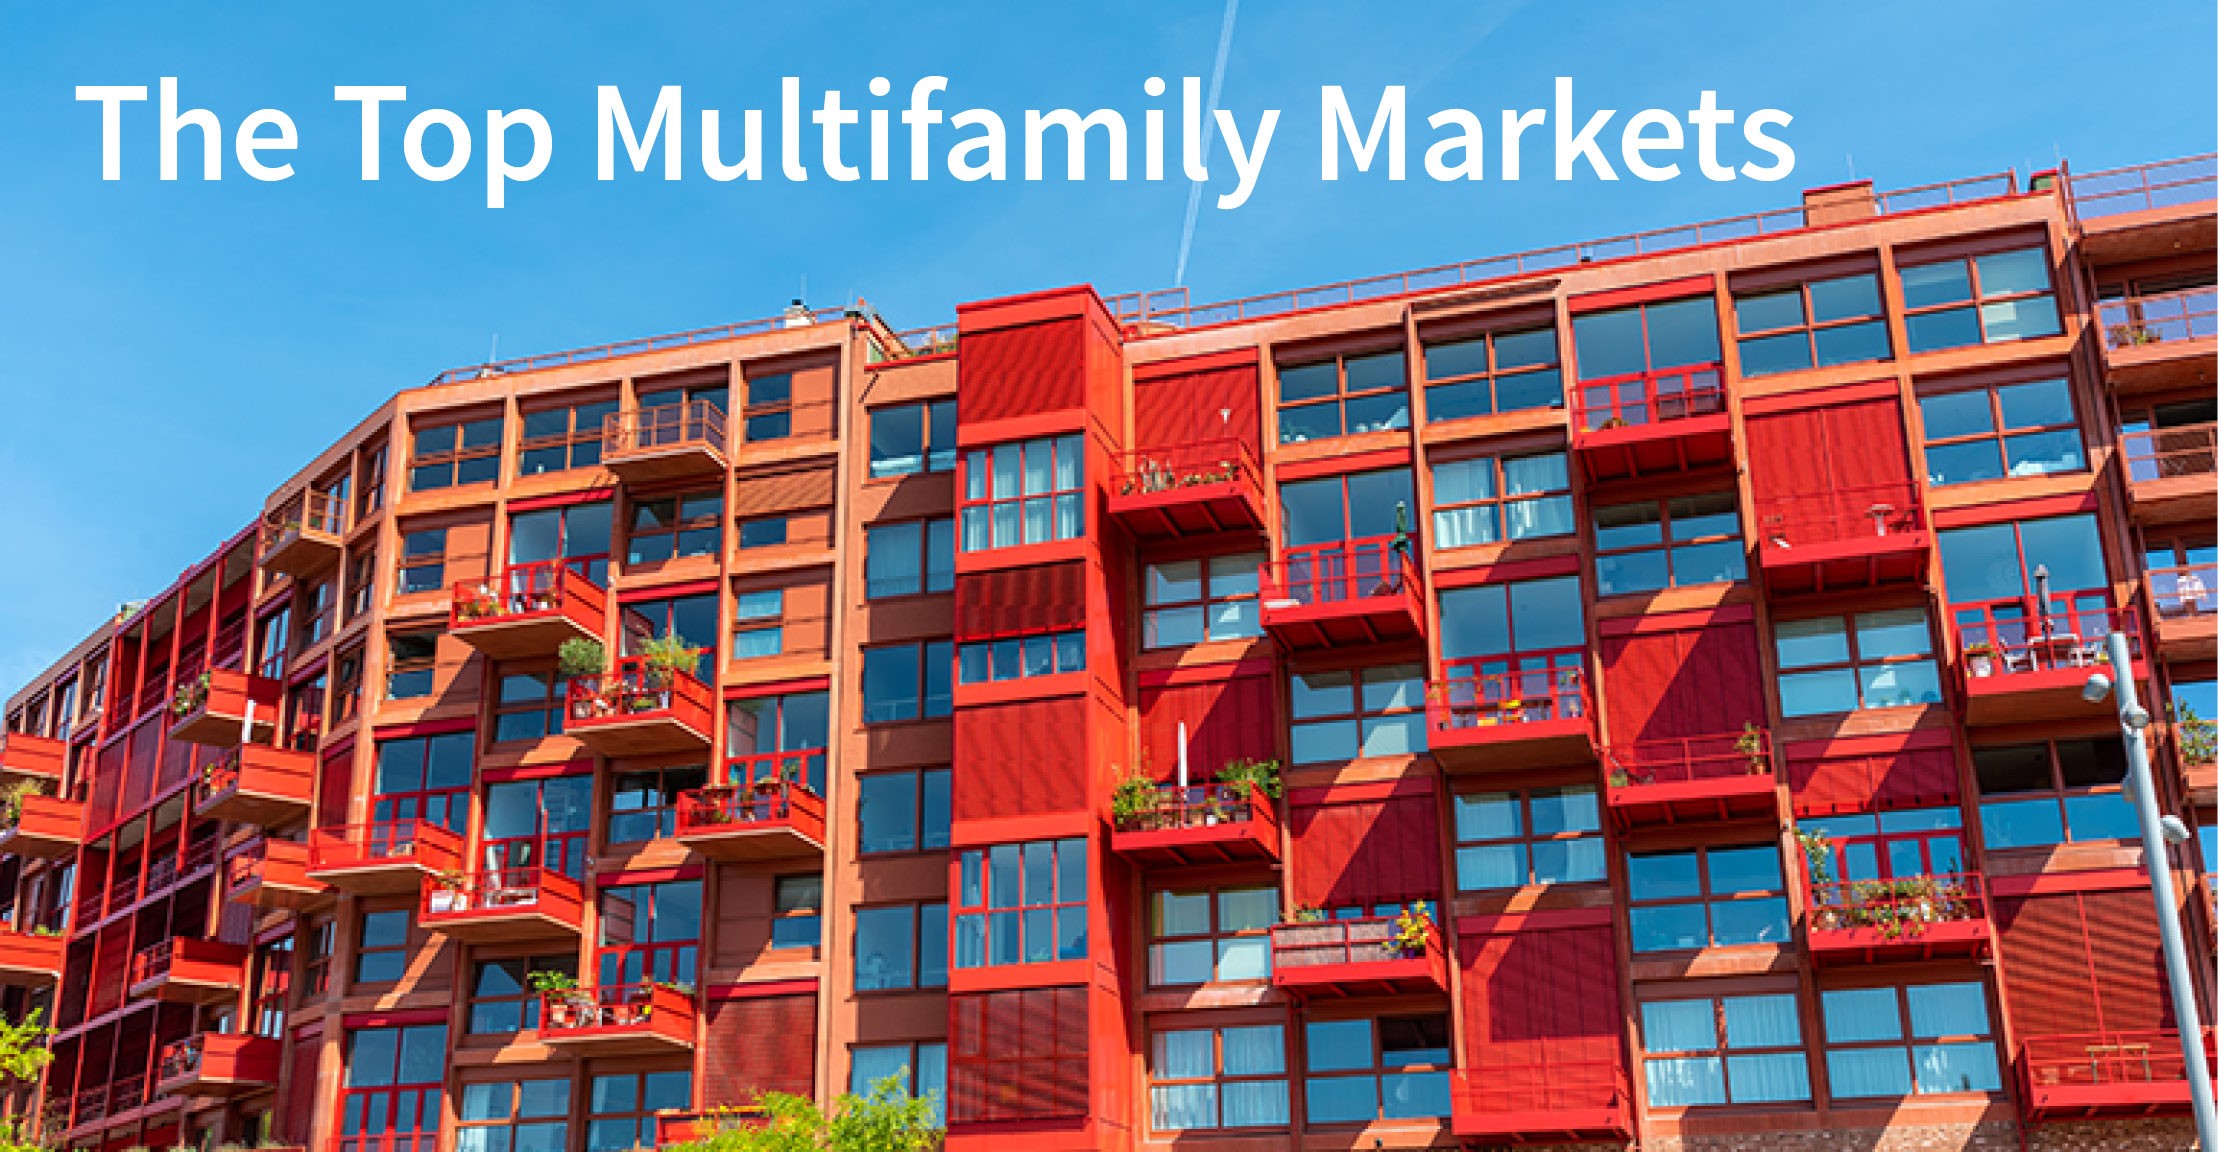 Ranking the Top Multifamily Markets Wealth Management